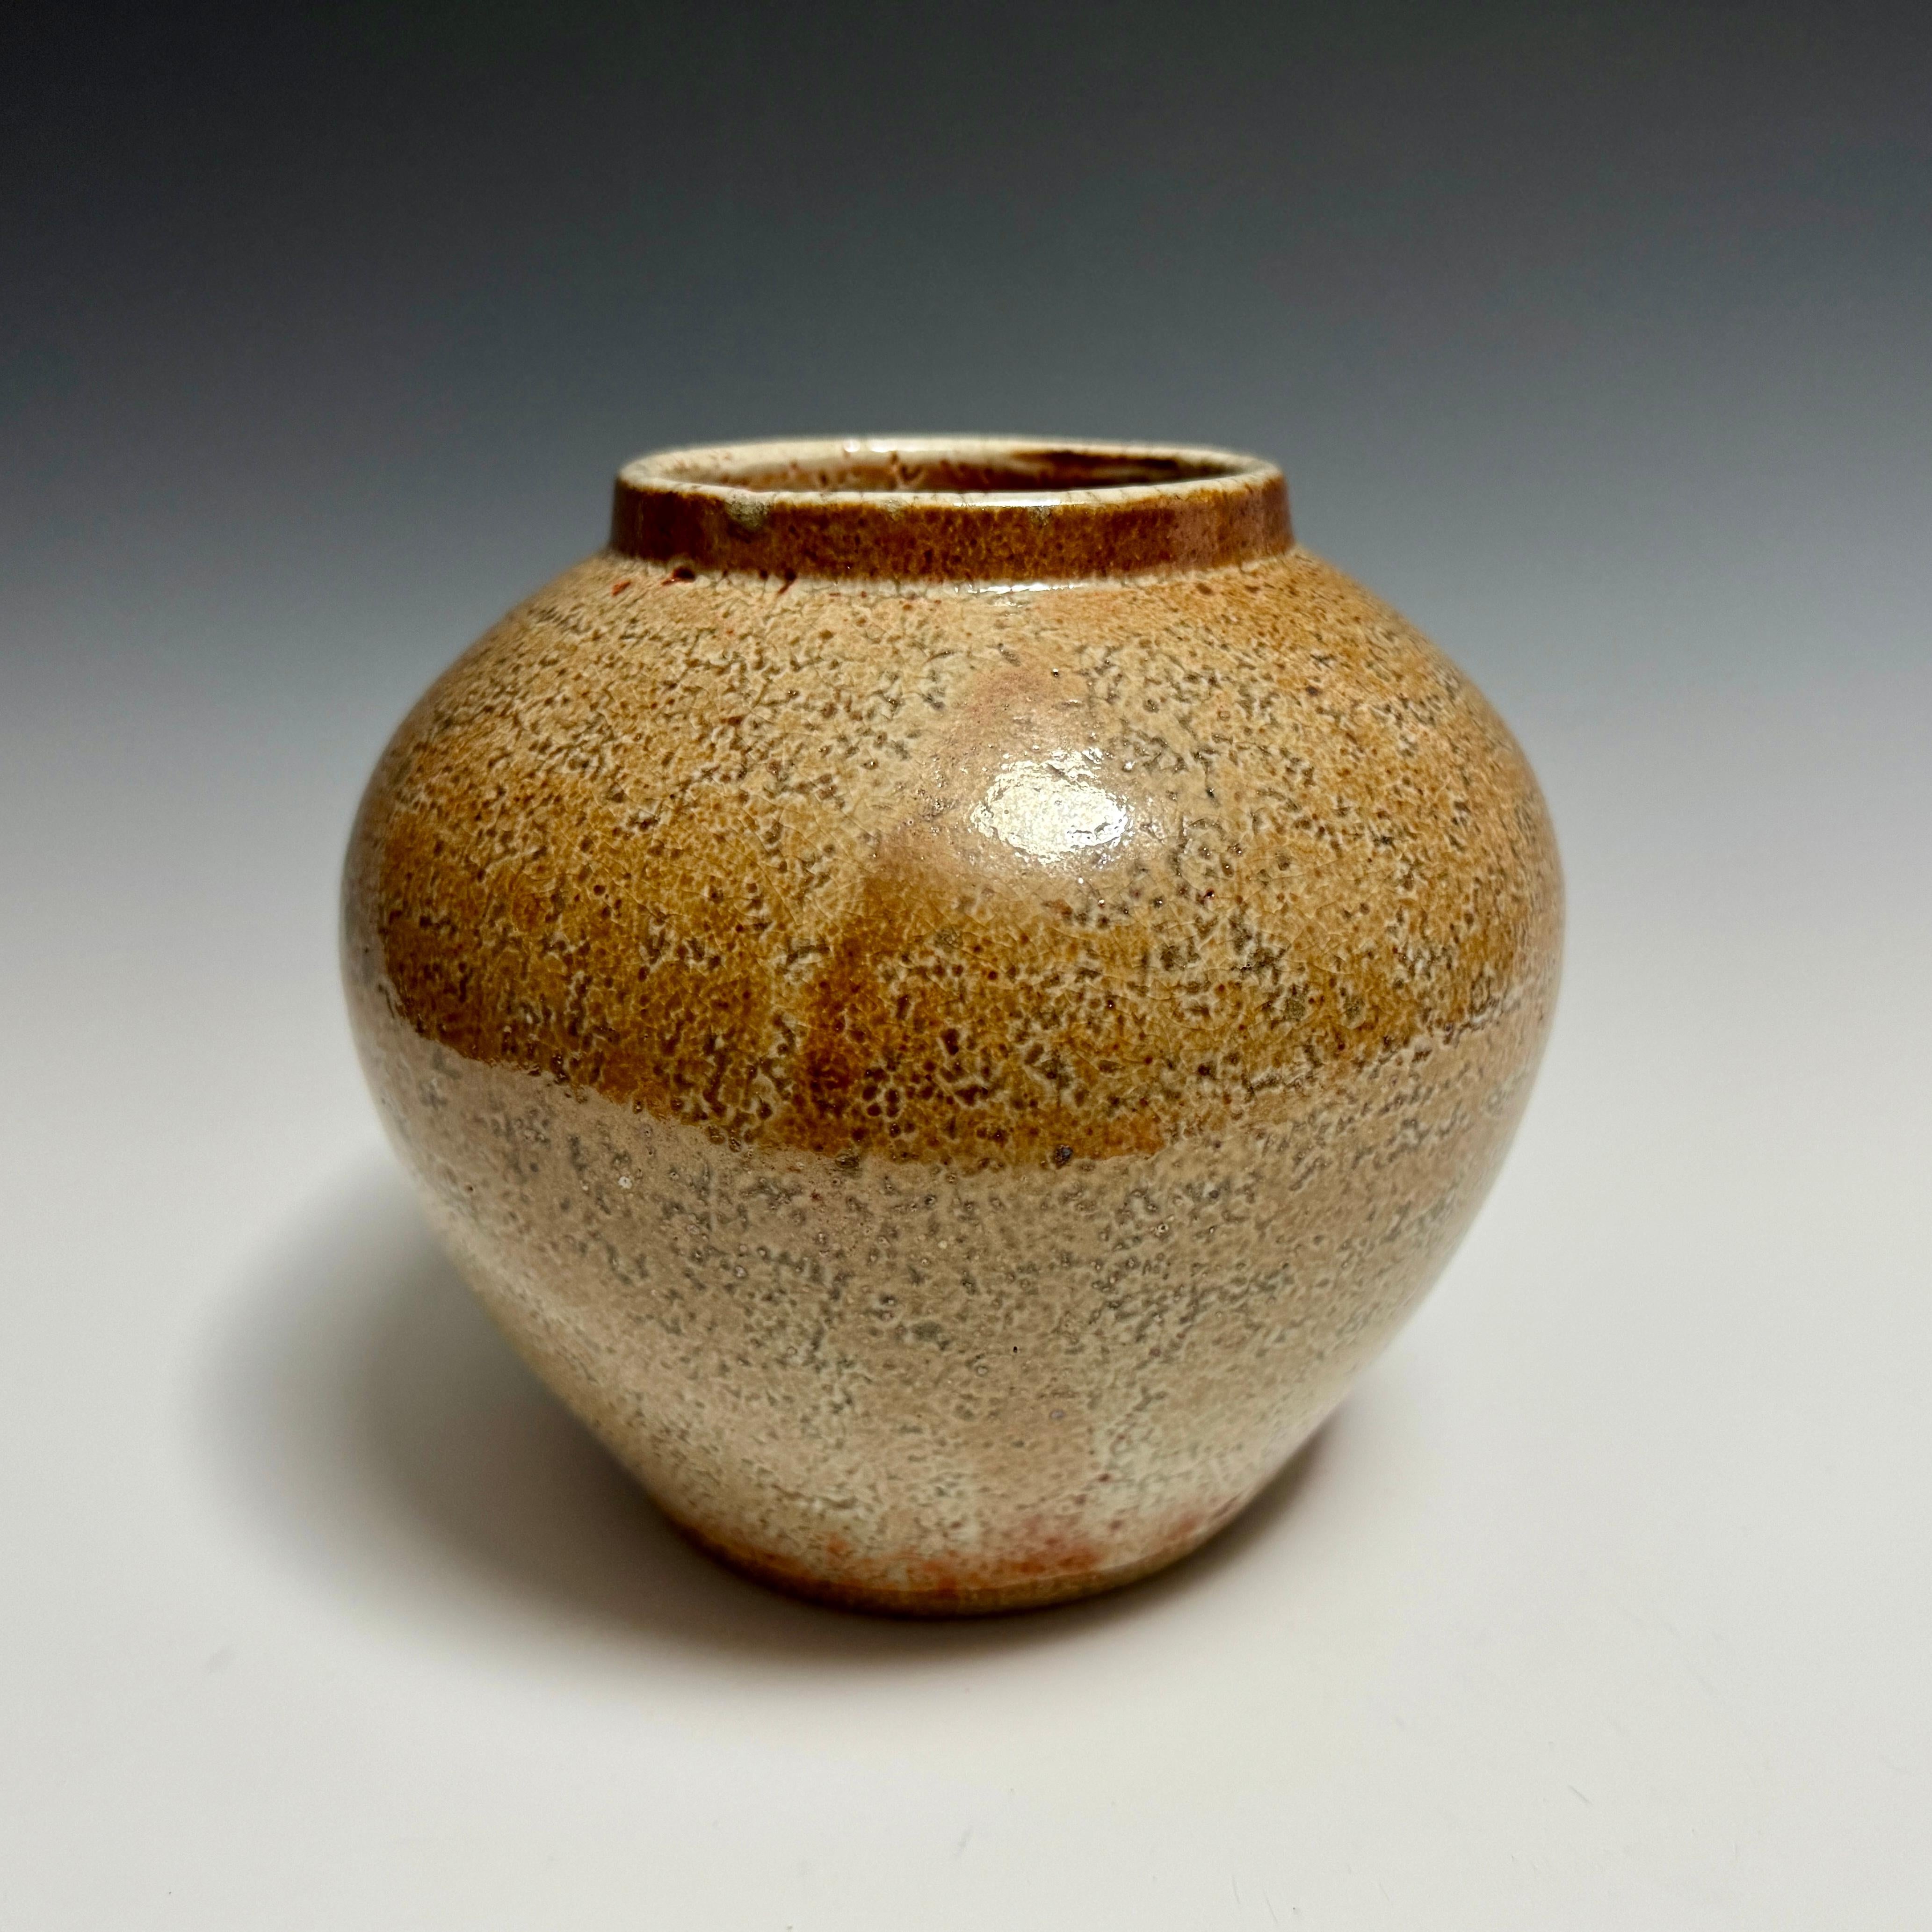 Contemporary Ceramic Shino Glazed Vessel by Jason Fox.

A Southern Californian for over half his life, Jason Fox draws upon his classical education in Architecture and Art History as well as his love of surfing and the ocean. He works organically